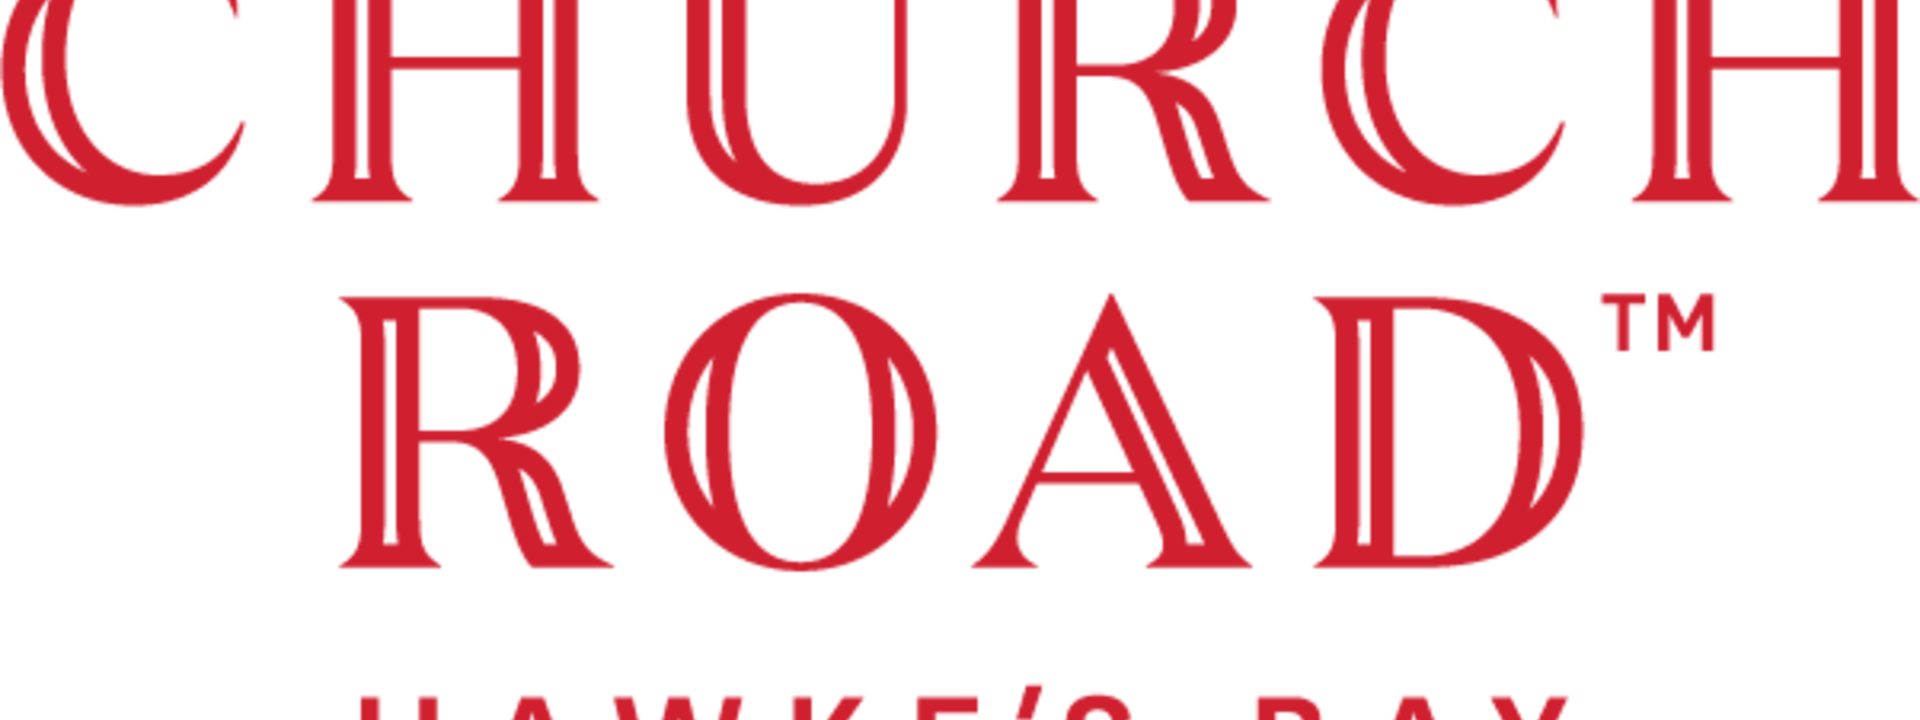 Church Road Logo_Red.png